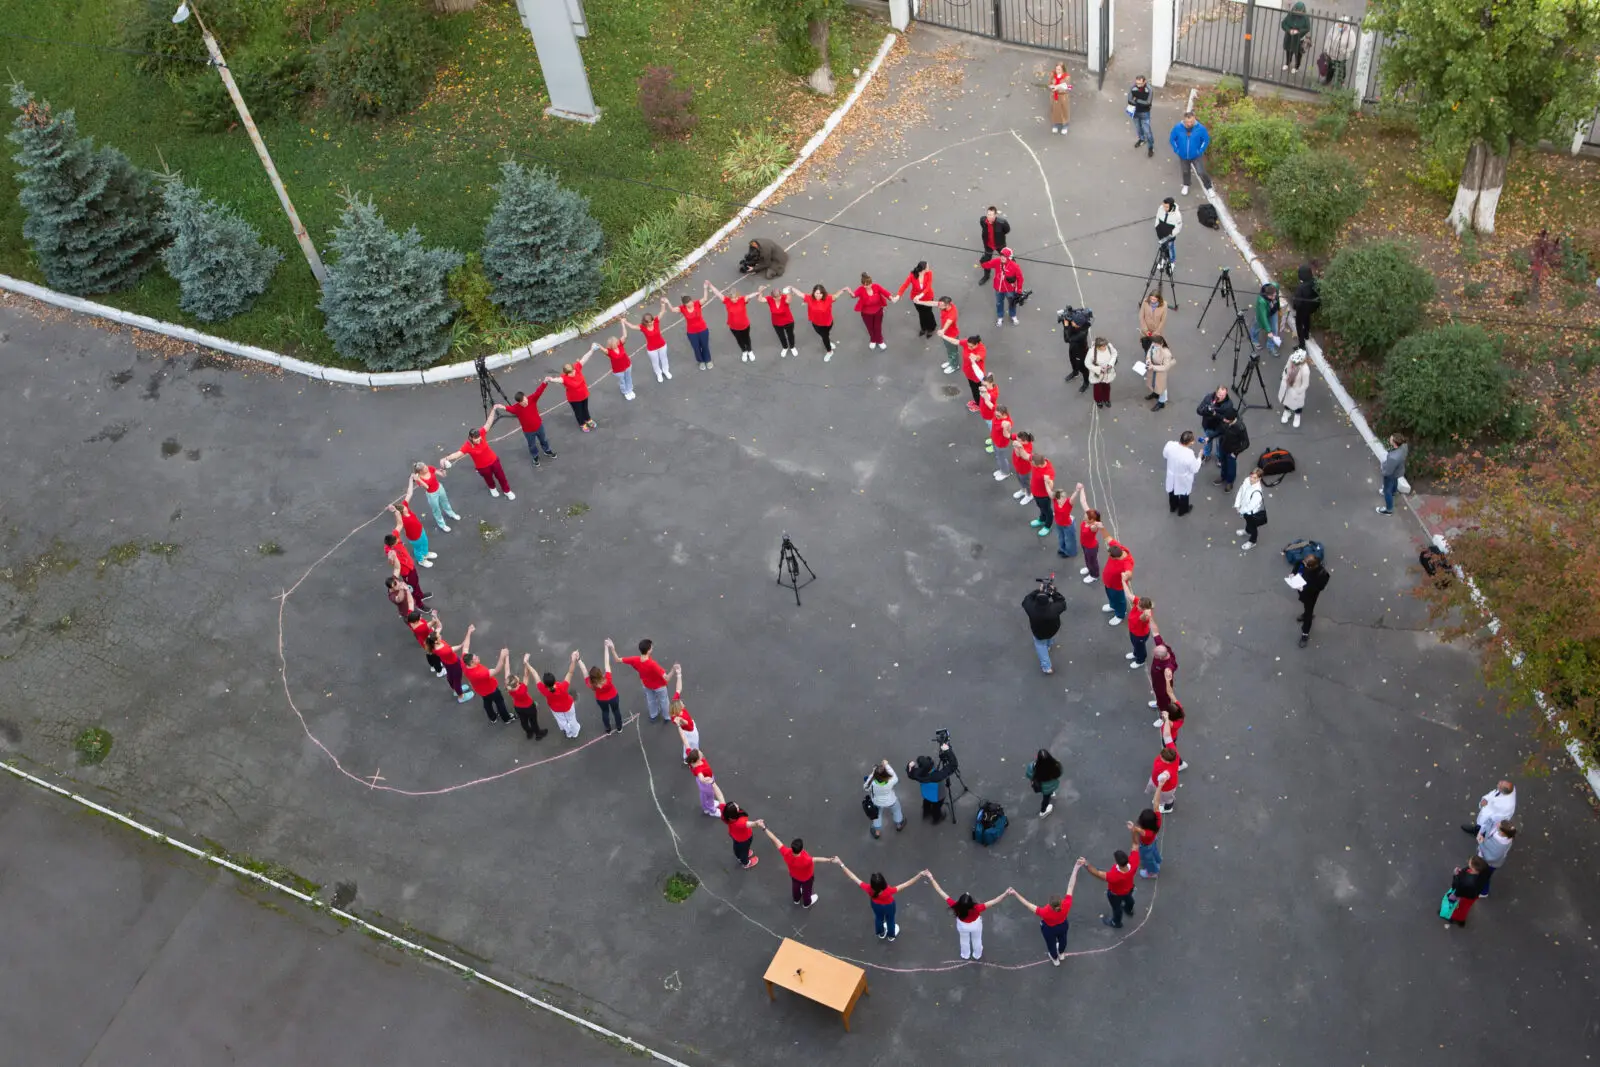 Drone captures a group of World Heart Day supporters posing in the shape of a heart